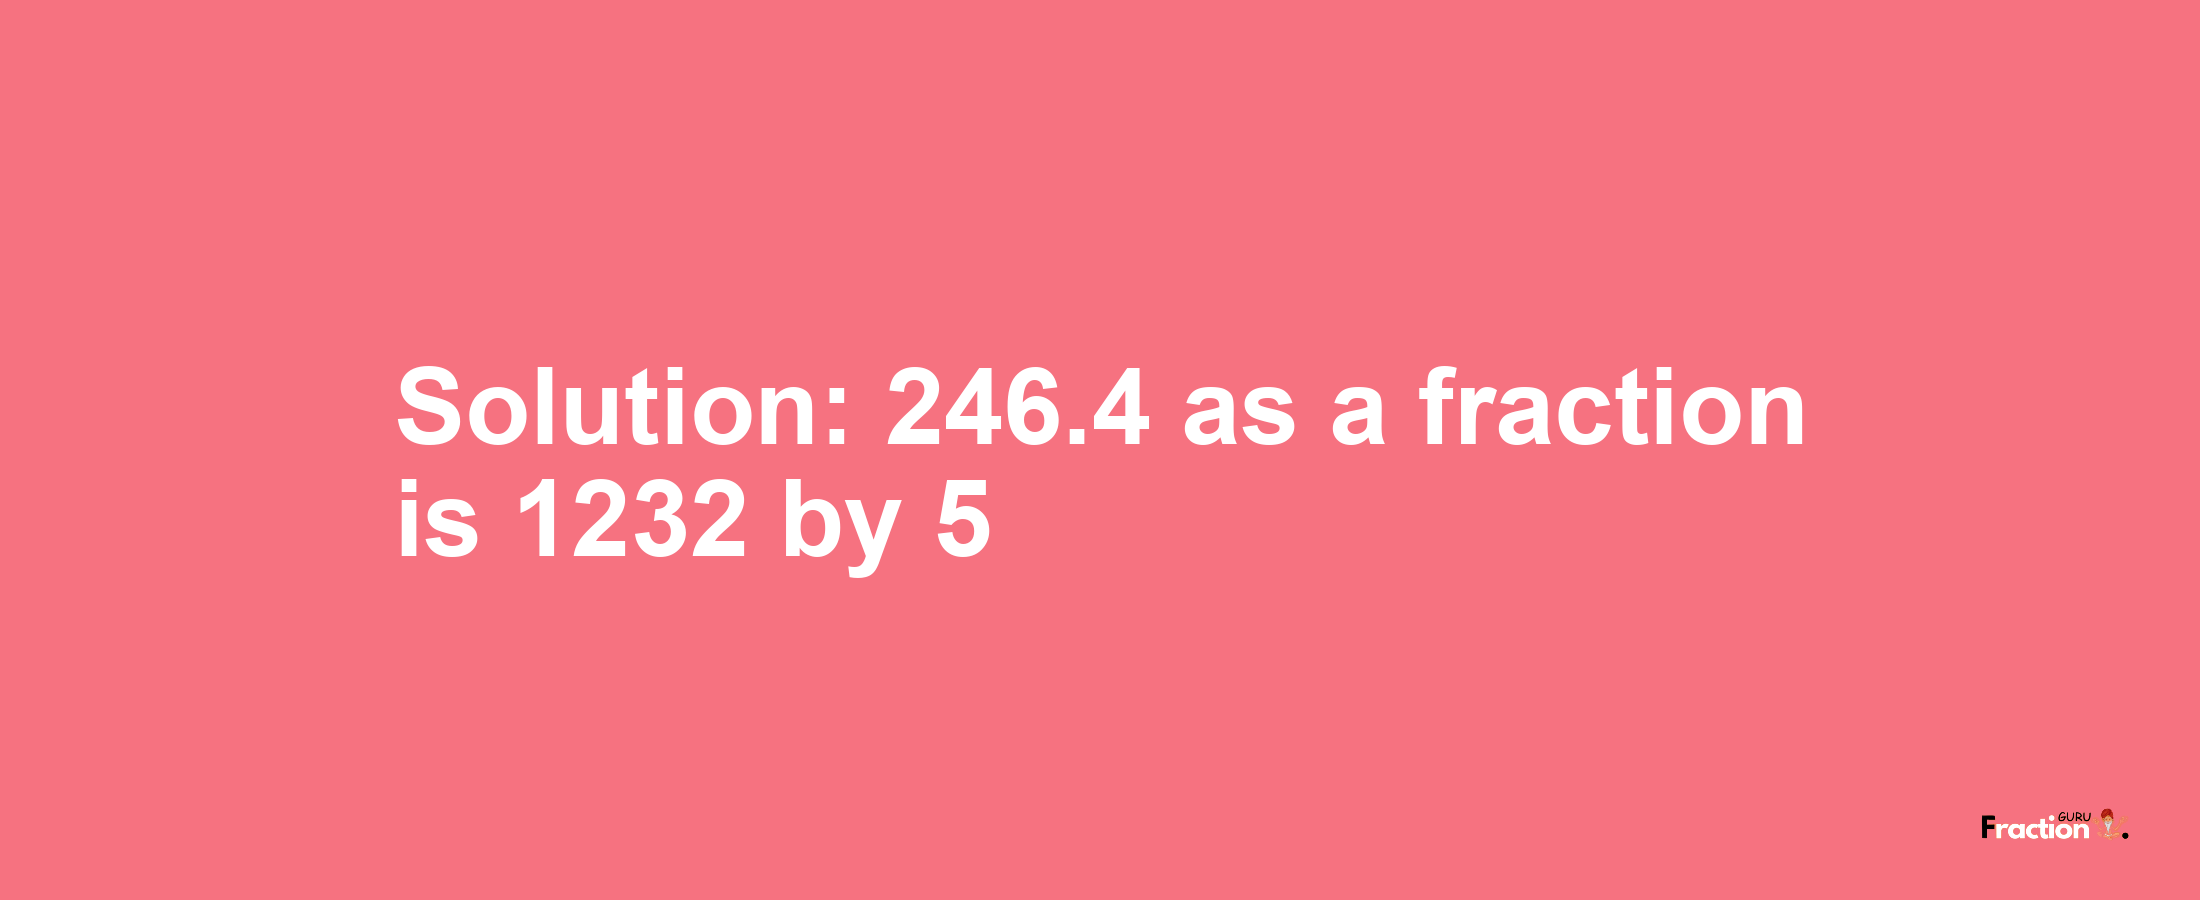 Solution:246.4 as a fraction is 1232/5